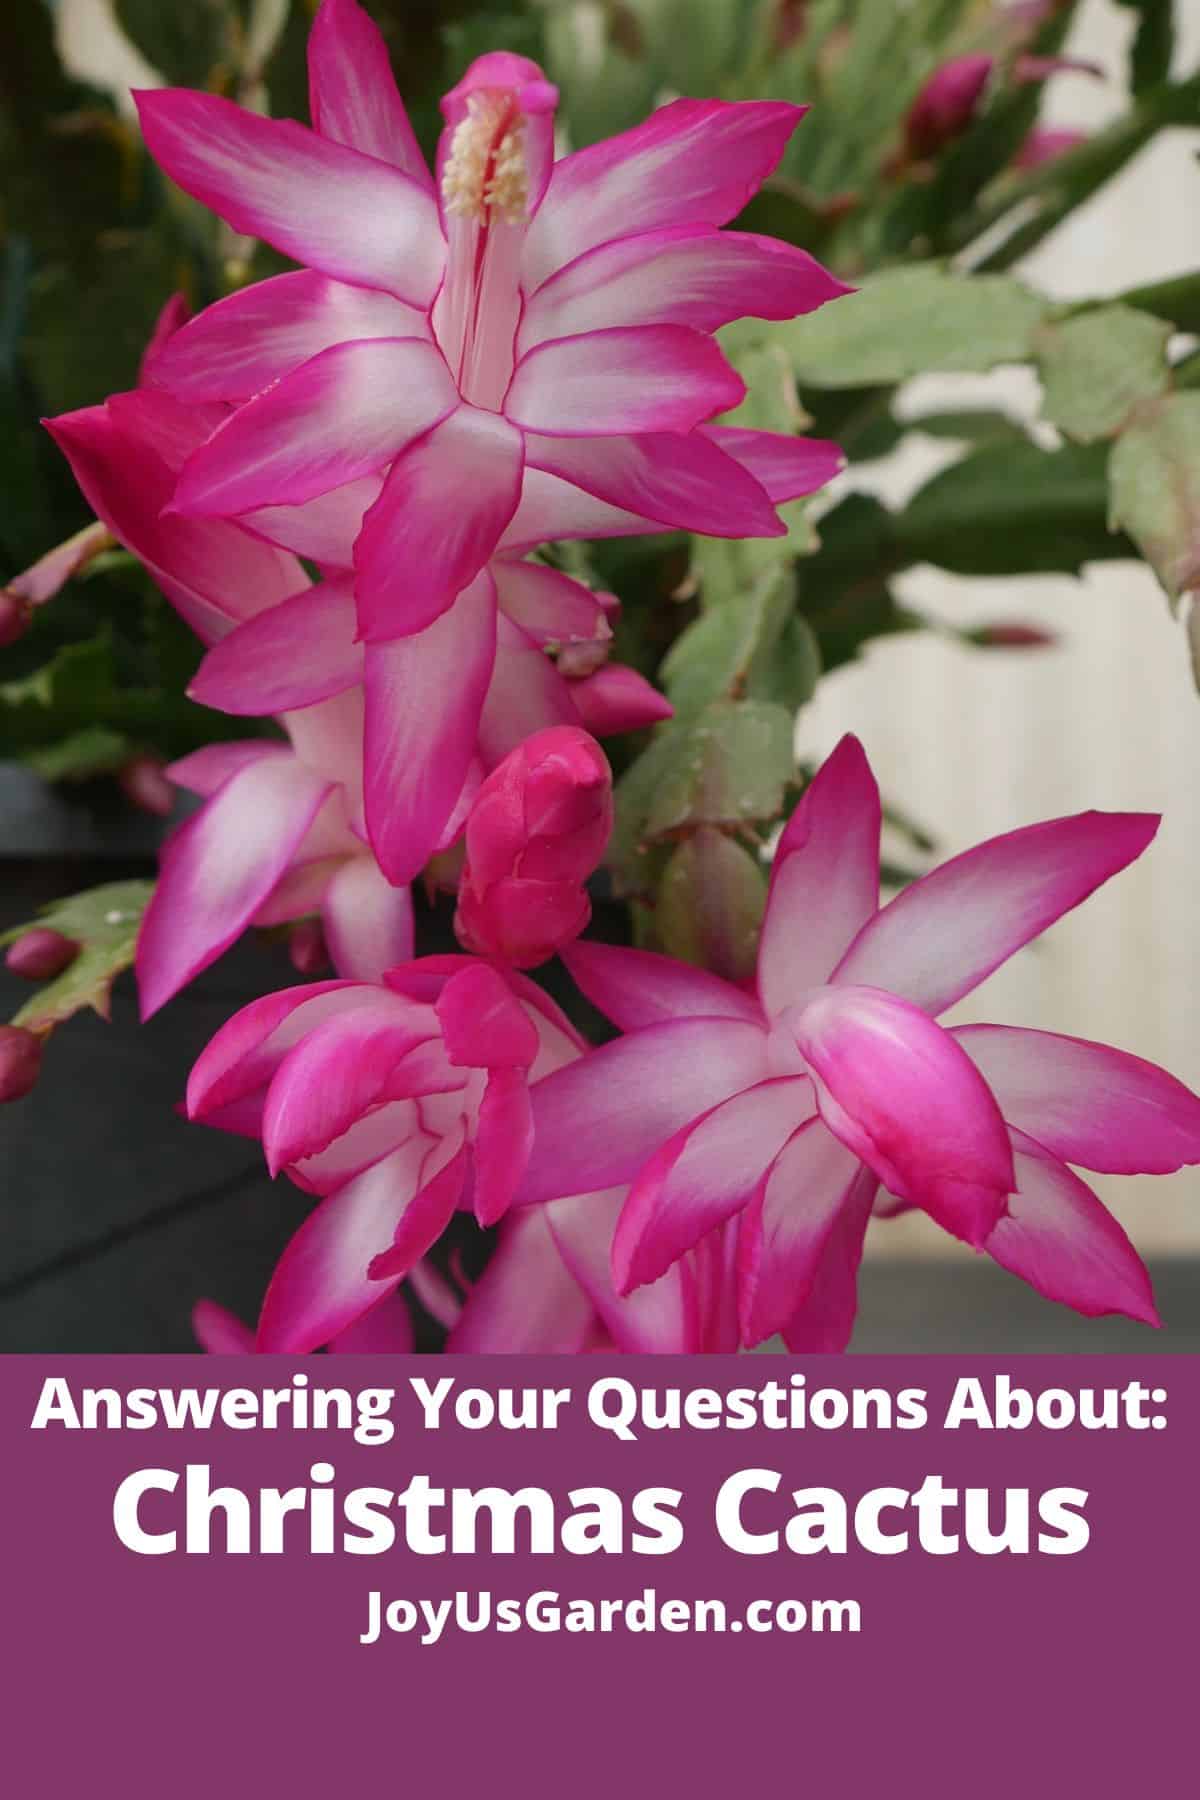 close up of deep rose christmas cactus flowers & buds the text at the bottom reads answering your questions about christmas cactus joyusgarden.com